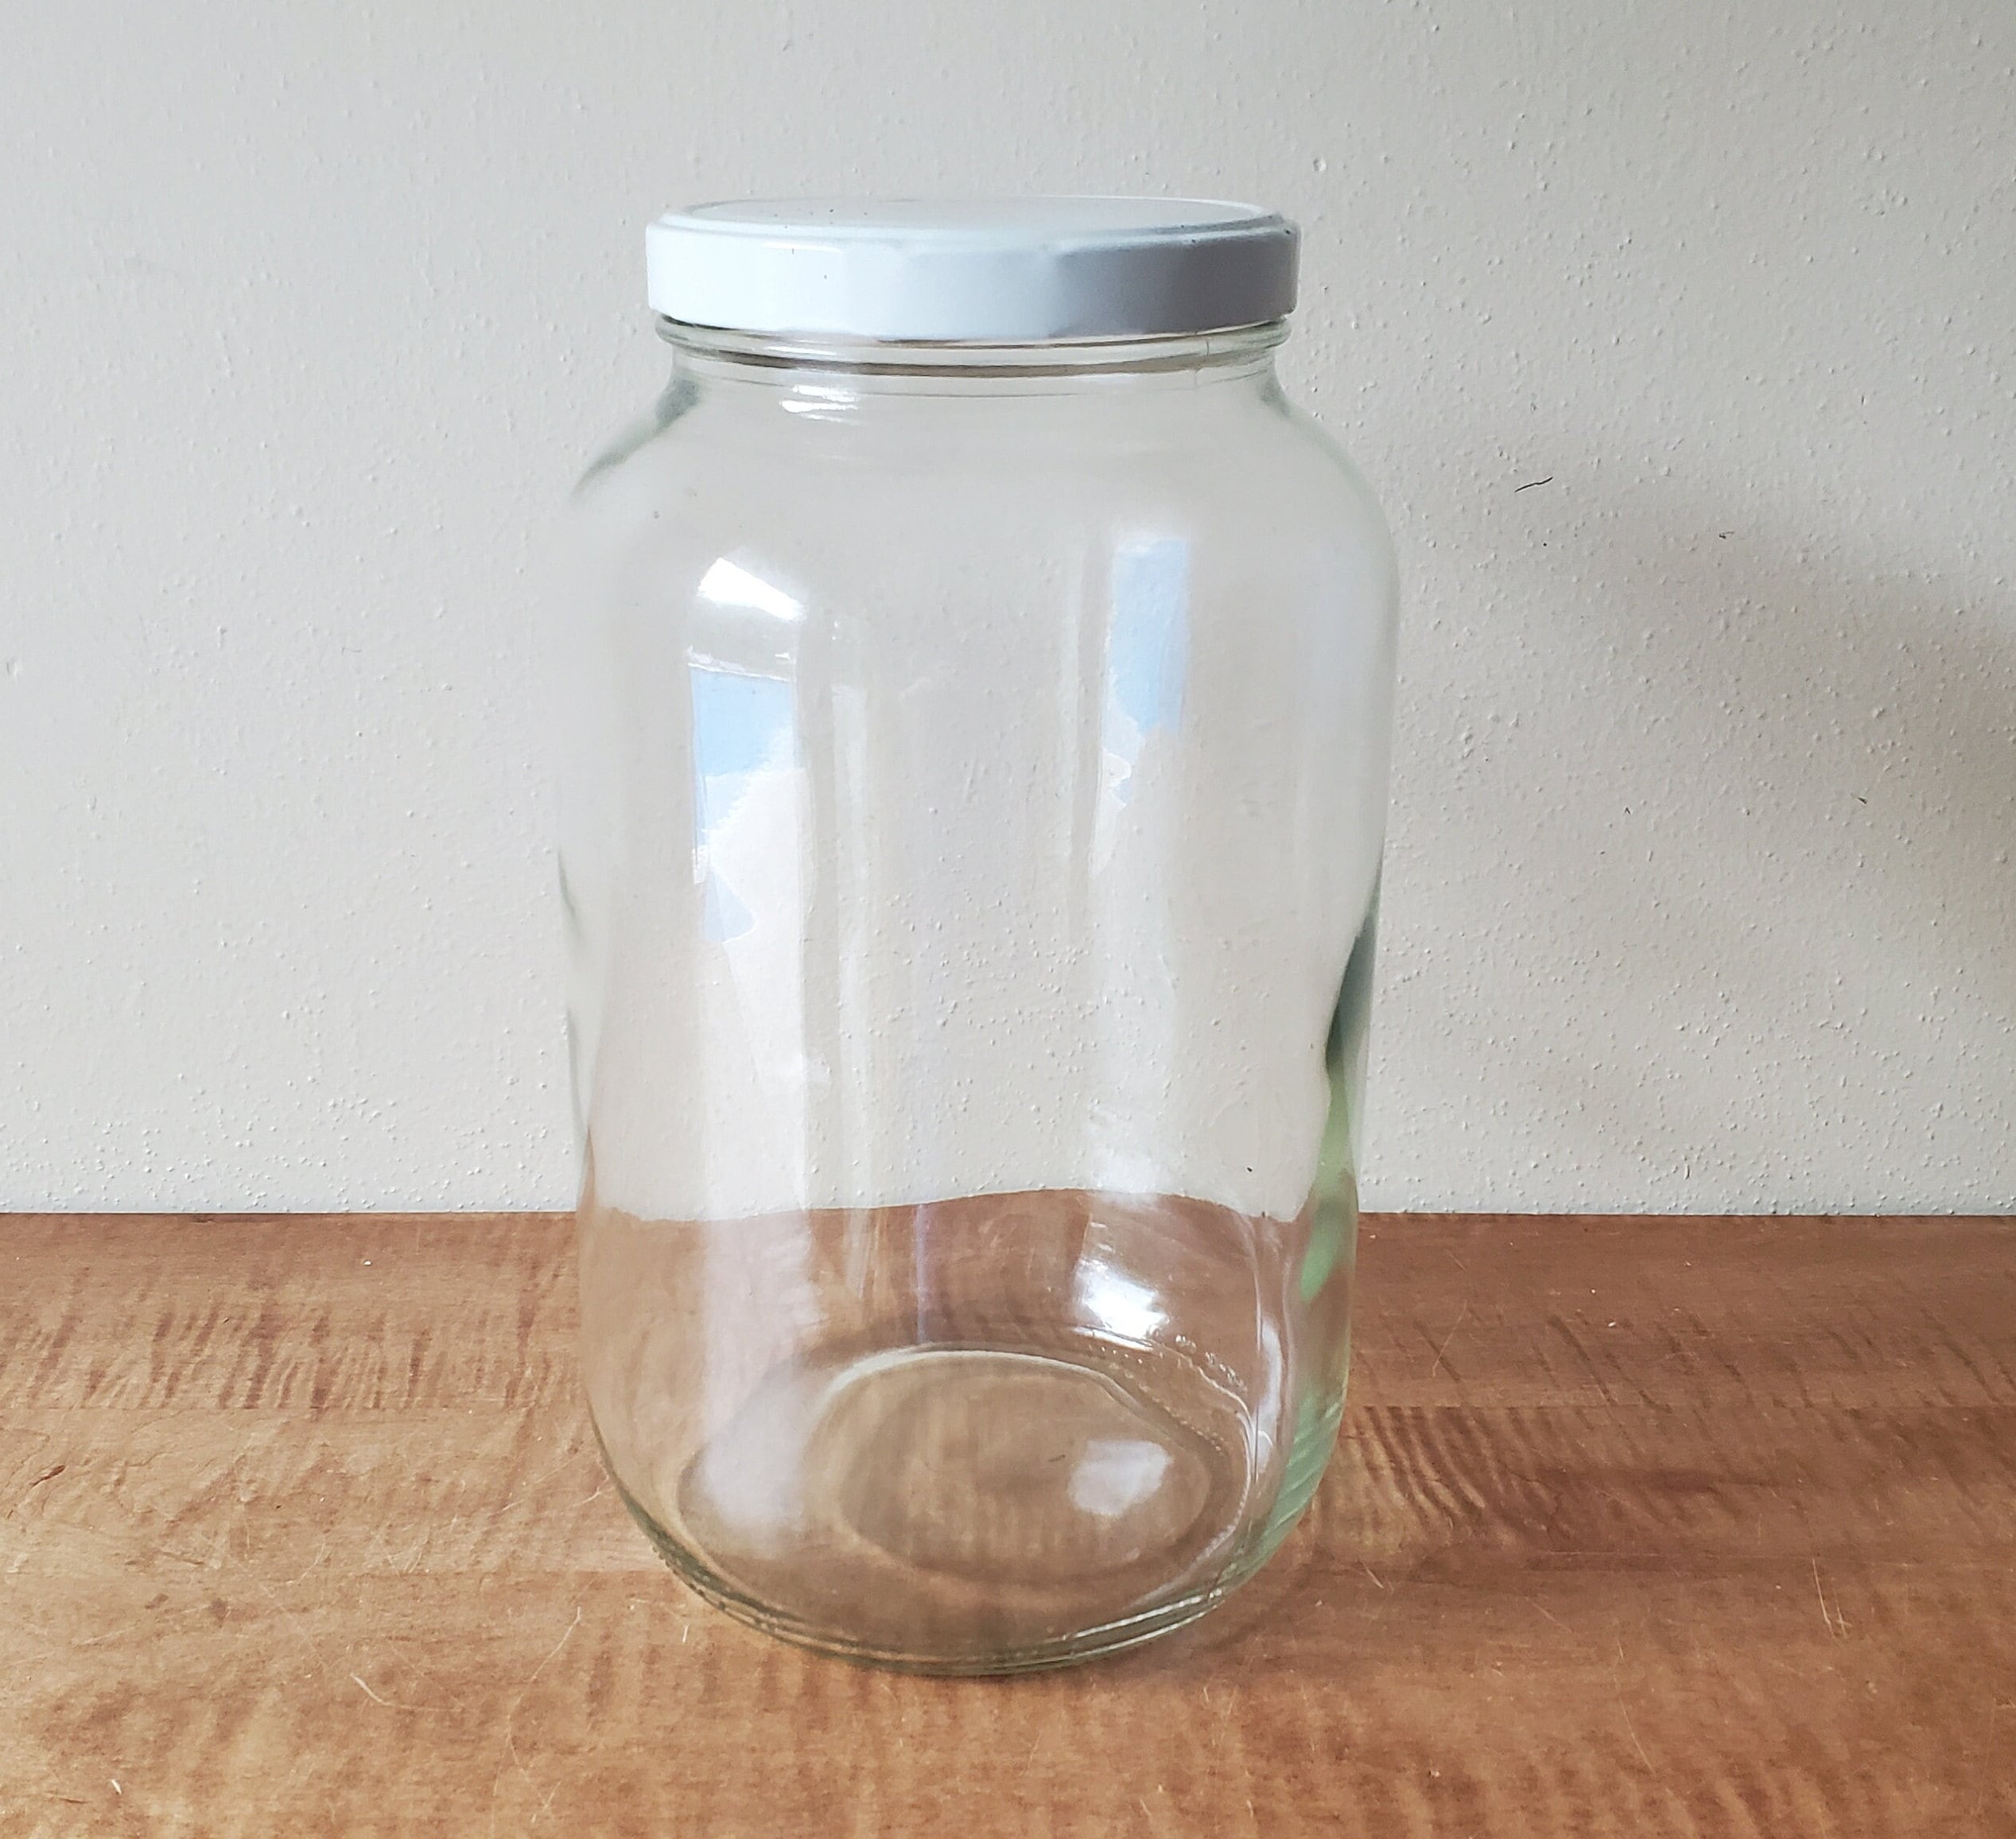 1 Gallon Square Glass Storage Jars with Airtight Lids, 2 Pack Large Glass  Pickle Jars for Fermenting, Clear Glass Canister for Flour, Cookie, Candy